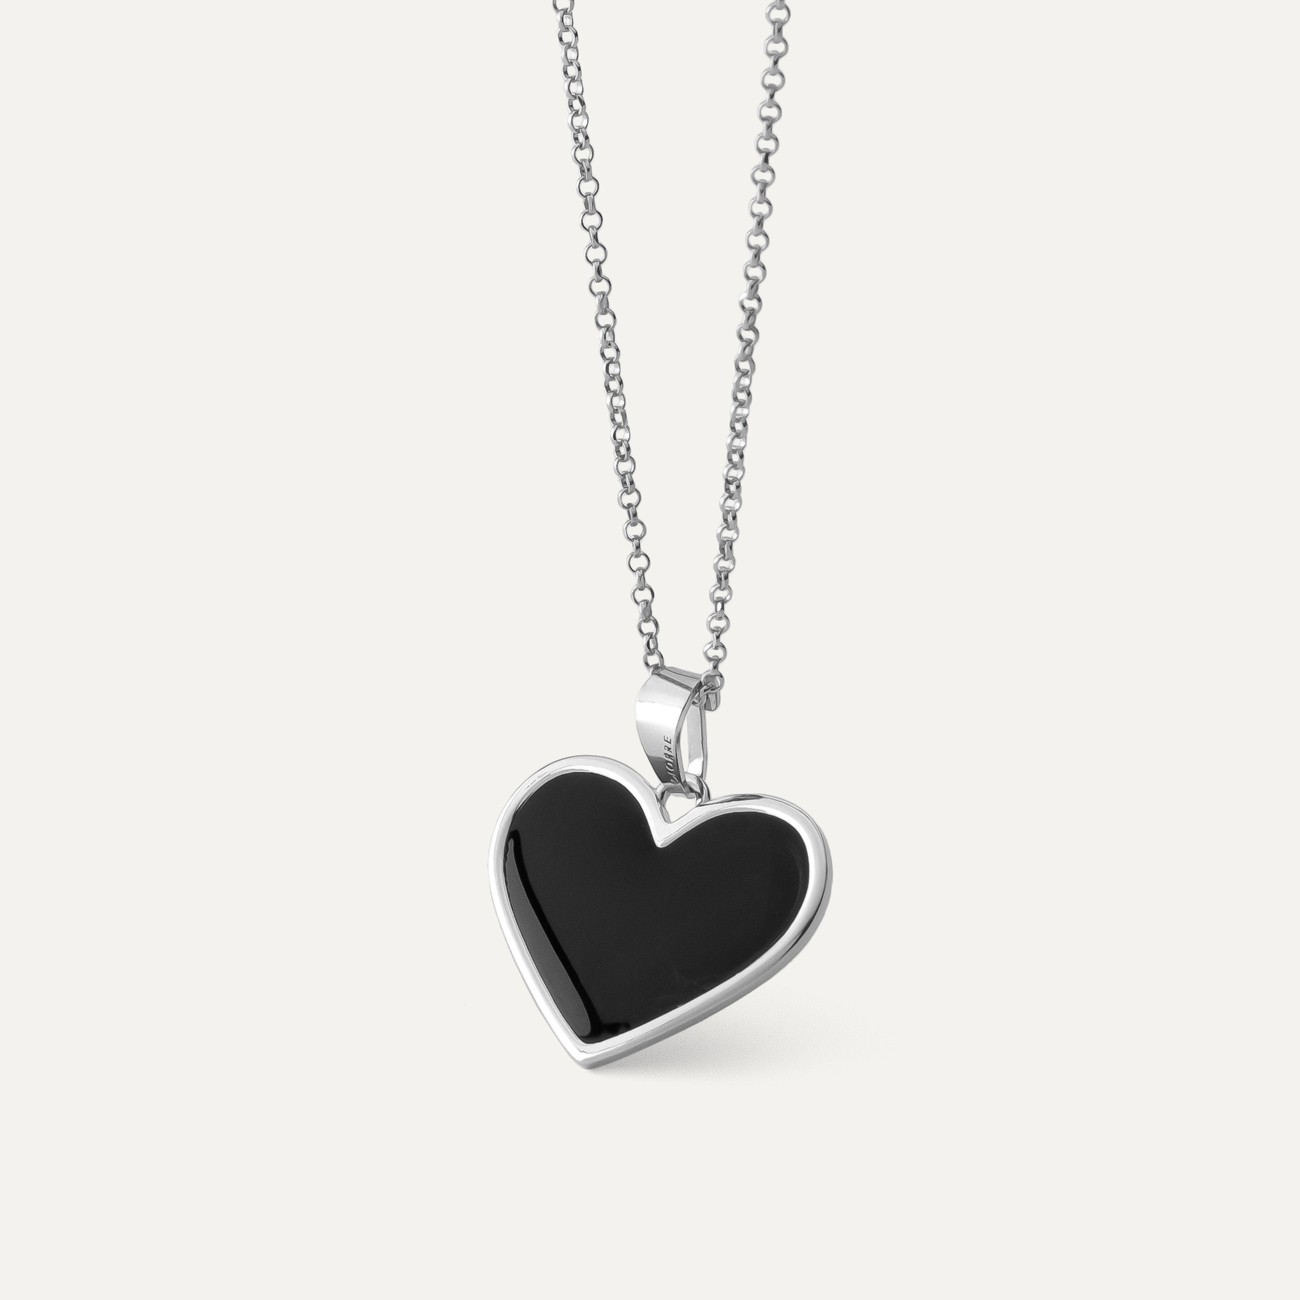 Black resin heart necklace, sterling silver 925